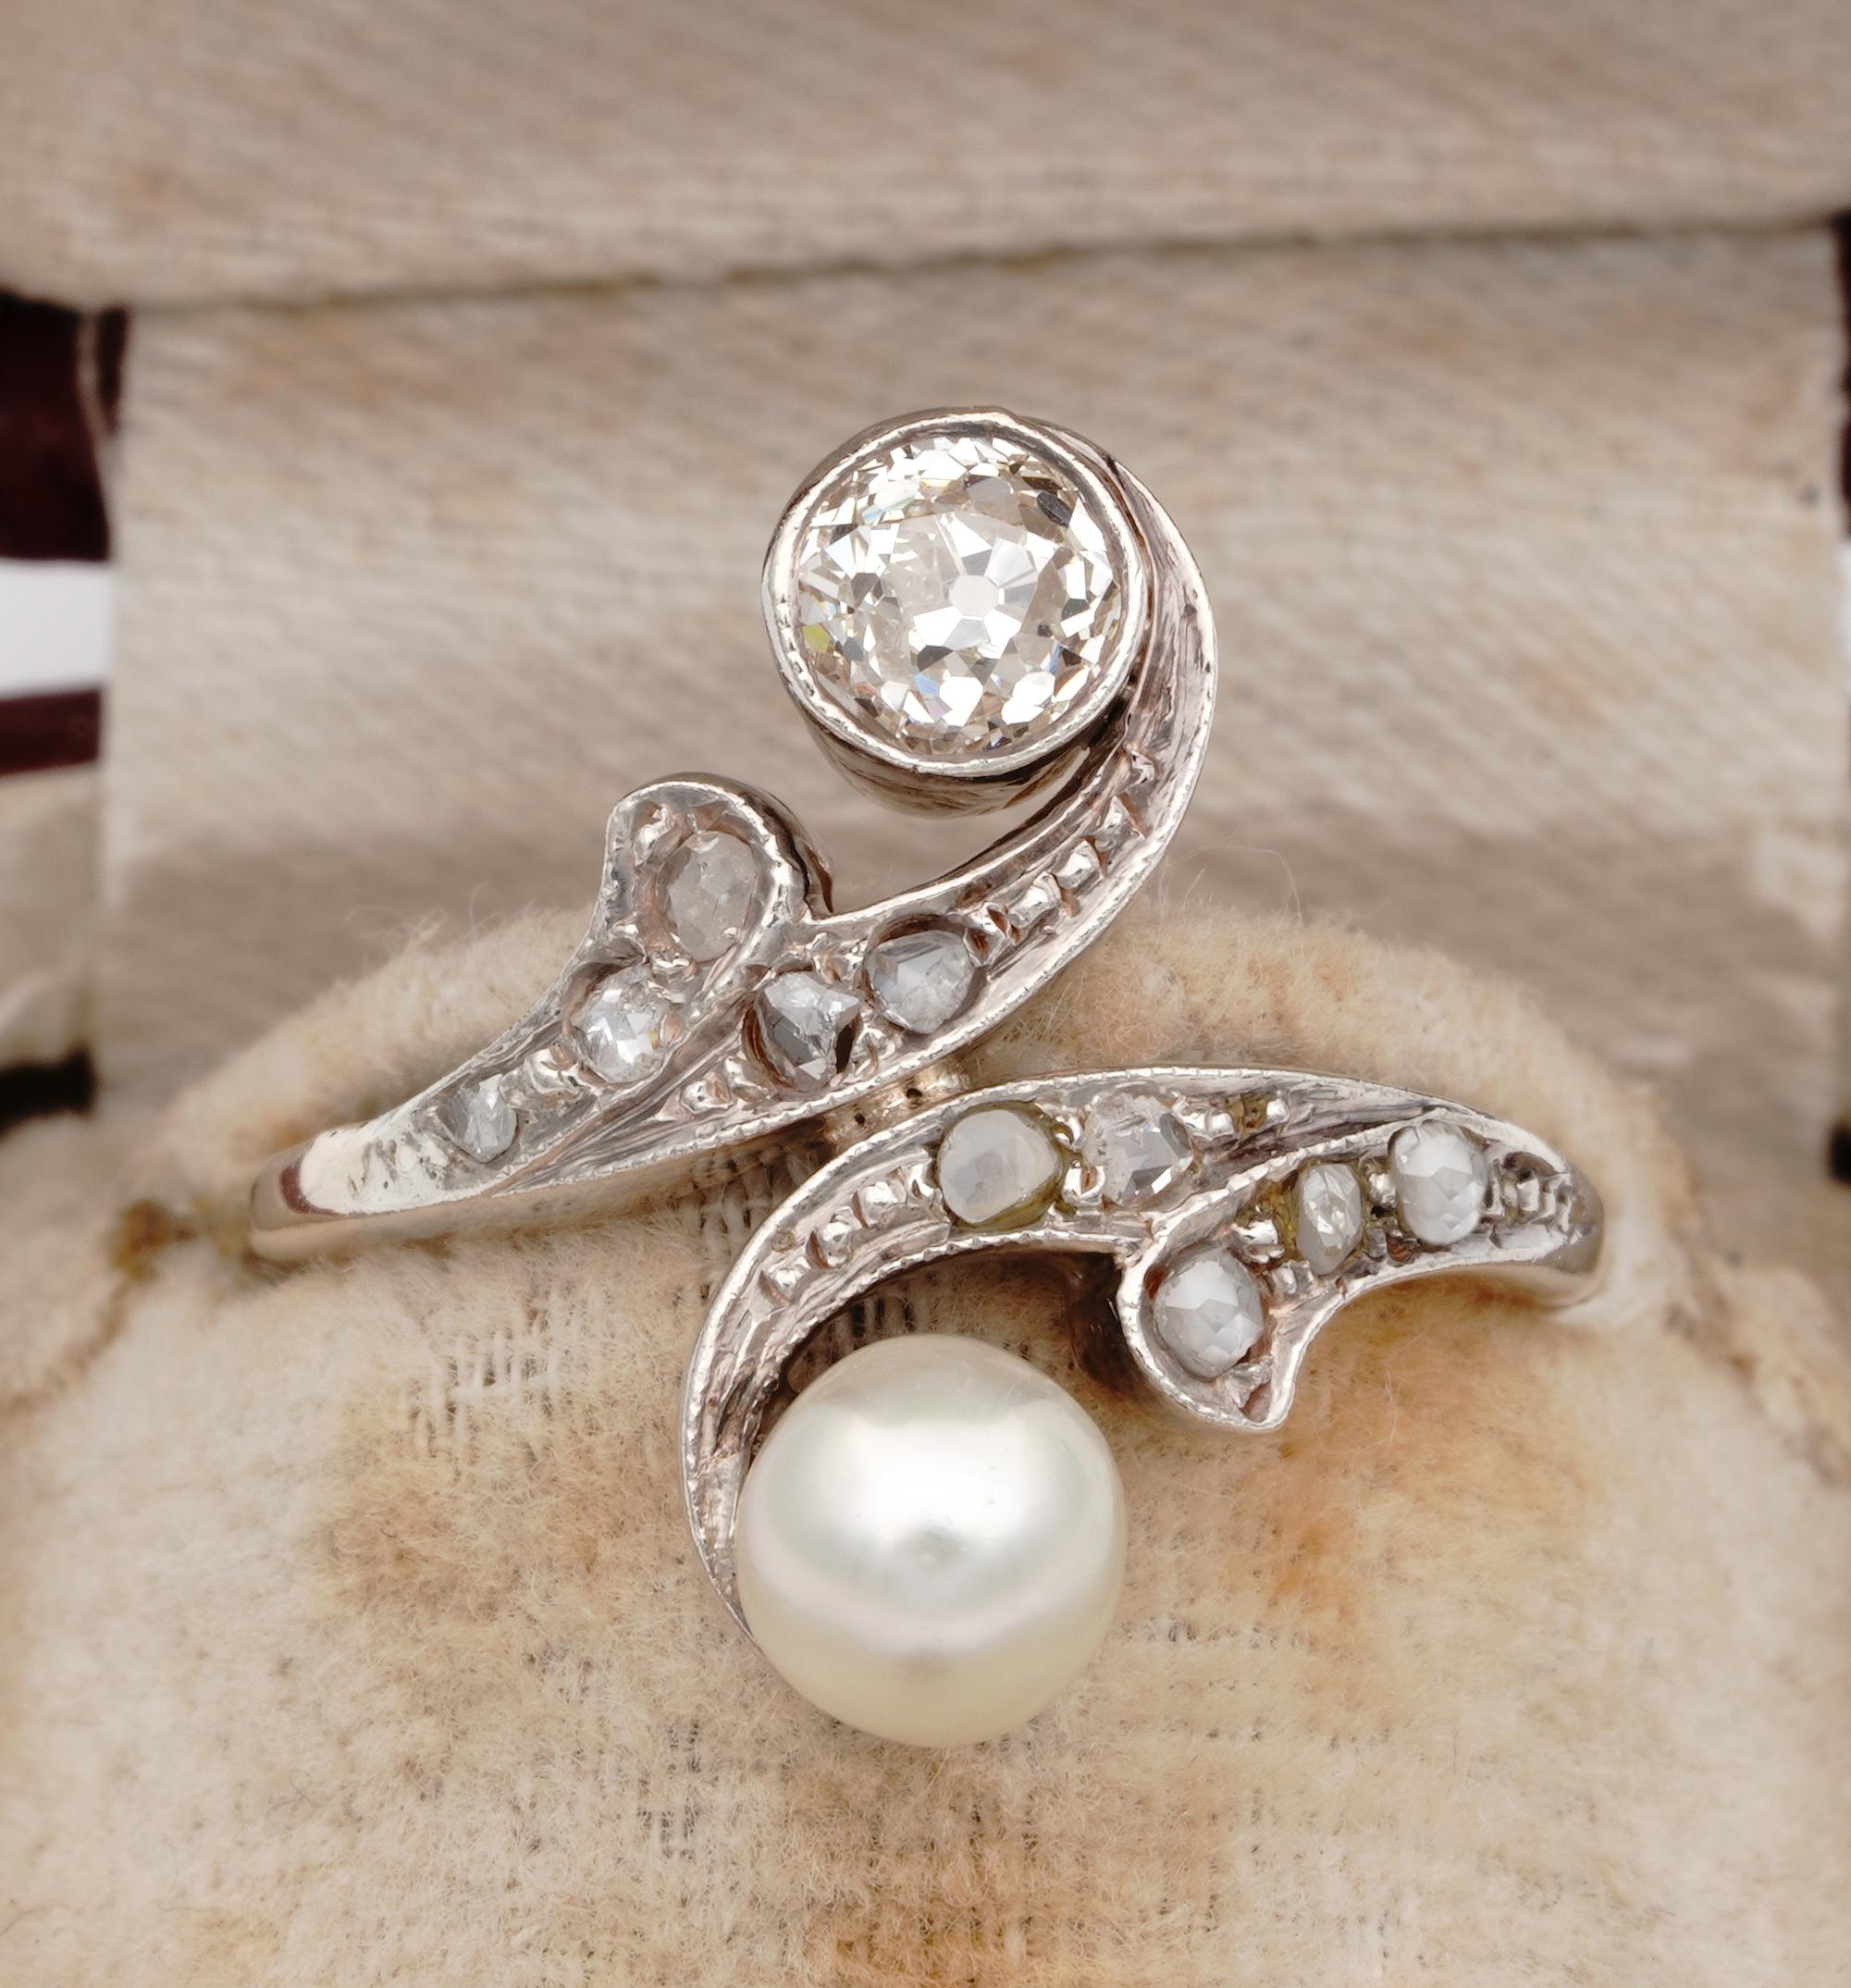  Unsurpassed Edwardian Beauty!

Fantastic toi et moi example of the Edwardian period hand crafted during 1900 ca.
Unsurpassed in elegance through the centuries, this more than 100 years old rare engagement ring is even more sought after and